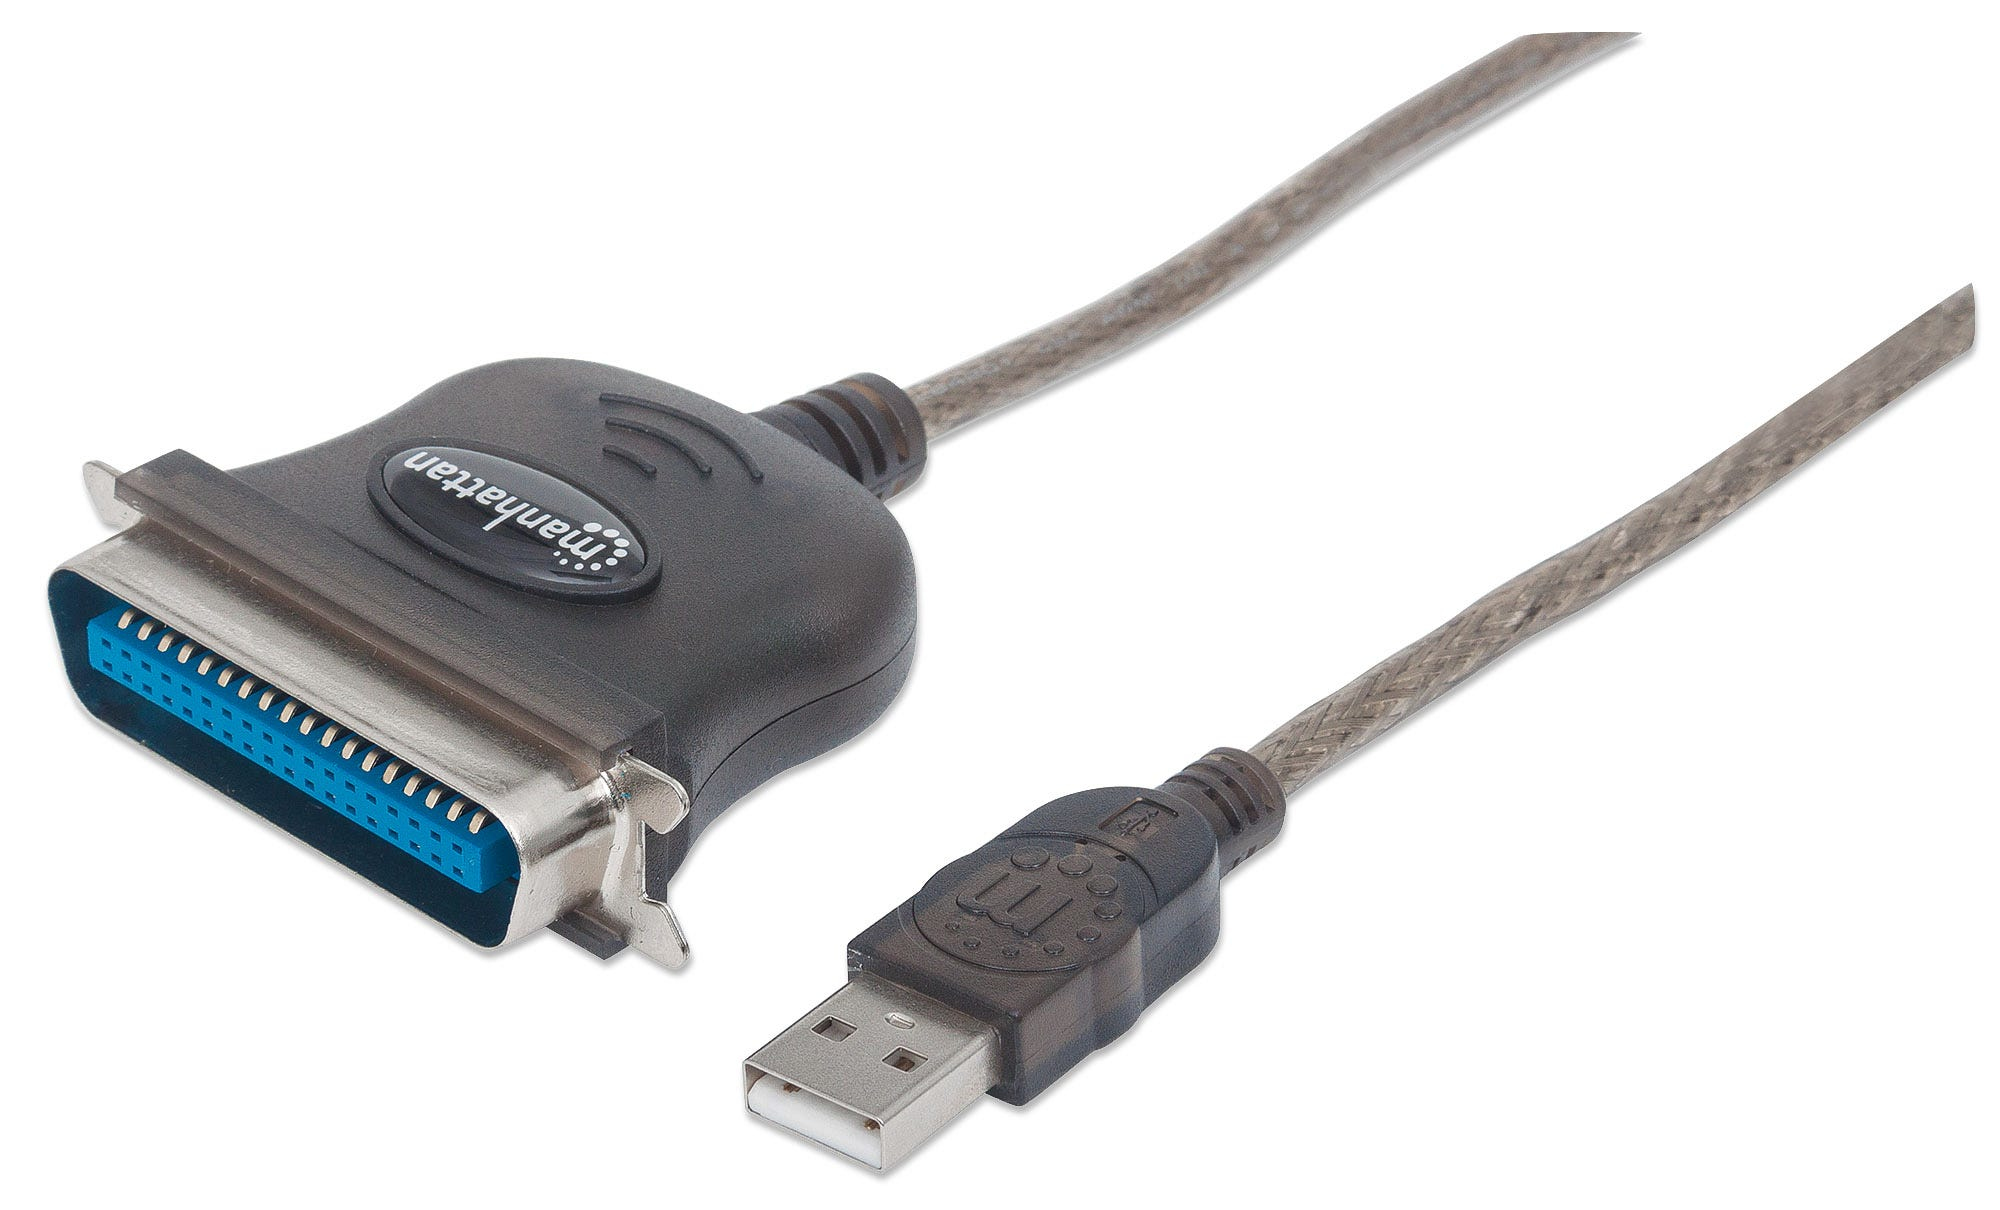 Manhattan USB-A to Parallel Printer Cen36 Converter Cable, 1.8m, Male to Male, Black, 12Mbps, IEEE 1284, bus power, Three Year Warranty, Blister - Druckerkabel - USB (M)